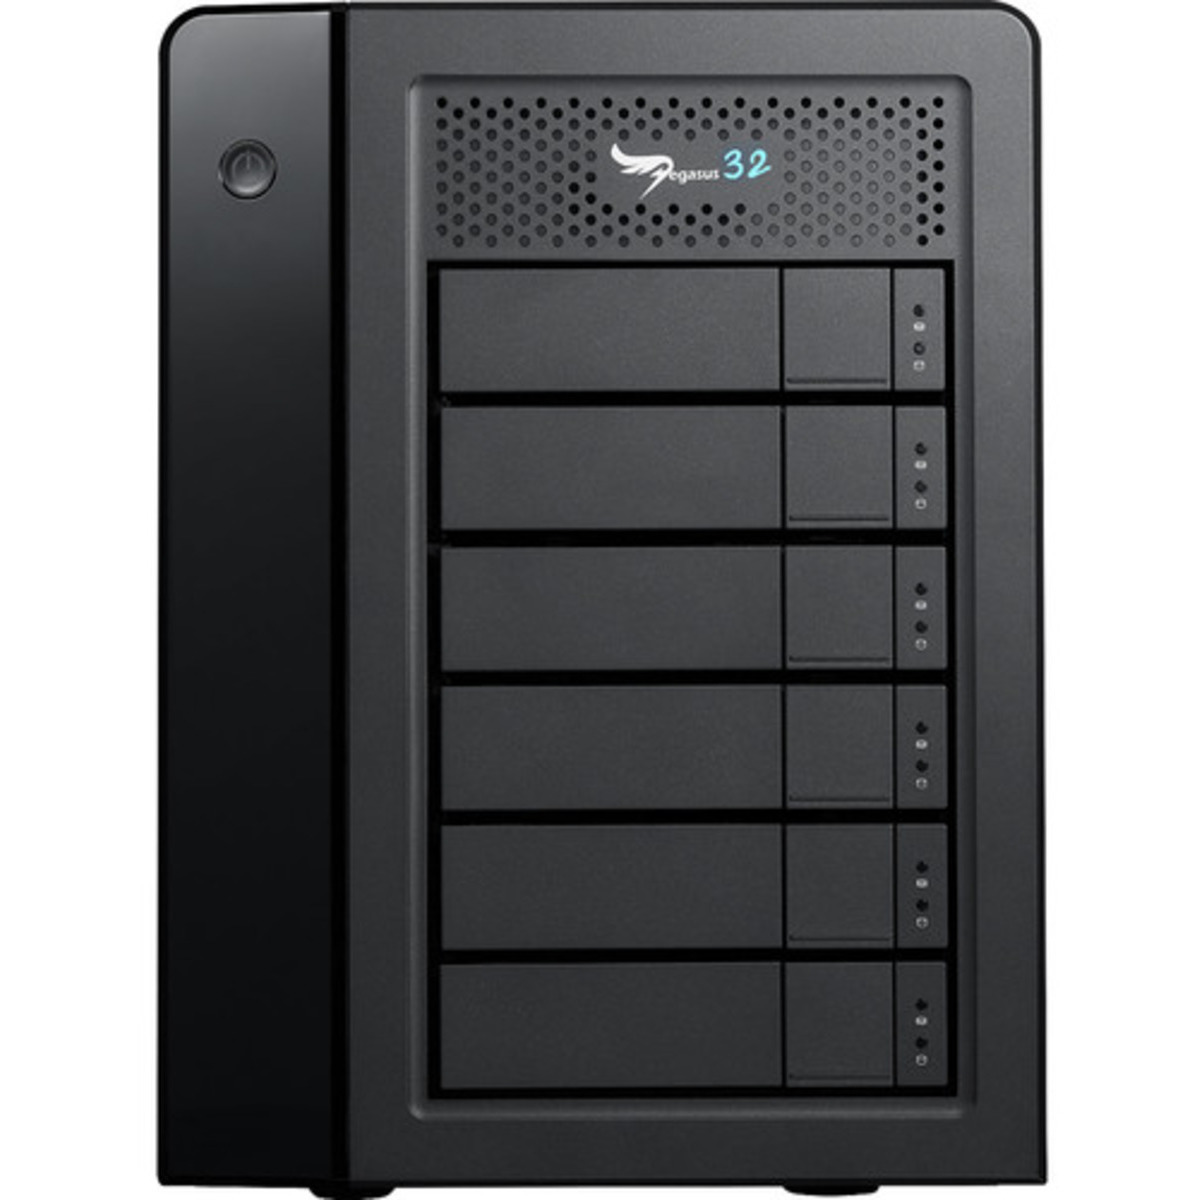 Promise Technology Pegasus32 R6 Thunderbolt 3 1.5tb 6-Bay Desktop Multimedia / Power User / Business DAS - Direct Attached Storage Device 3x500gb Western Digital Red SA500 WDS500G1R0A 2.5 560/530MB/s SATA 6Gb/s SSD NAS Class Drives Installed - Burn-In Tested Pegasus32 R6 Thunderbolt 3